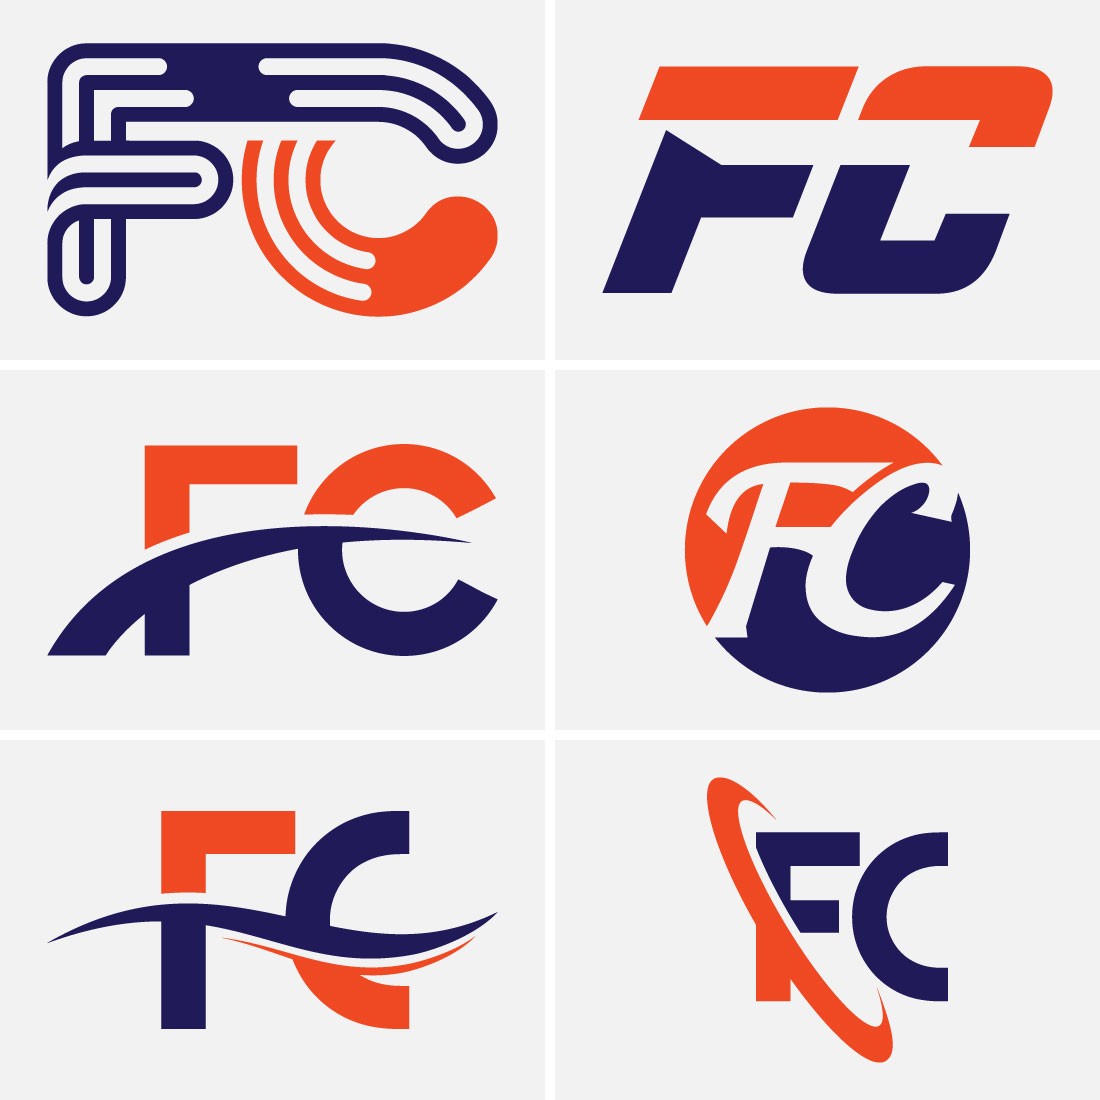 F C. FC Initial Letter Logo design vector template - Stock Photo #28239983  | PantherMedia Stock Agency